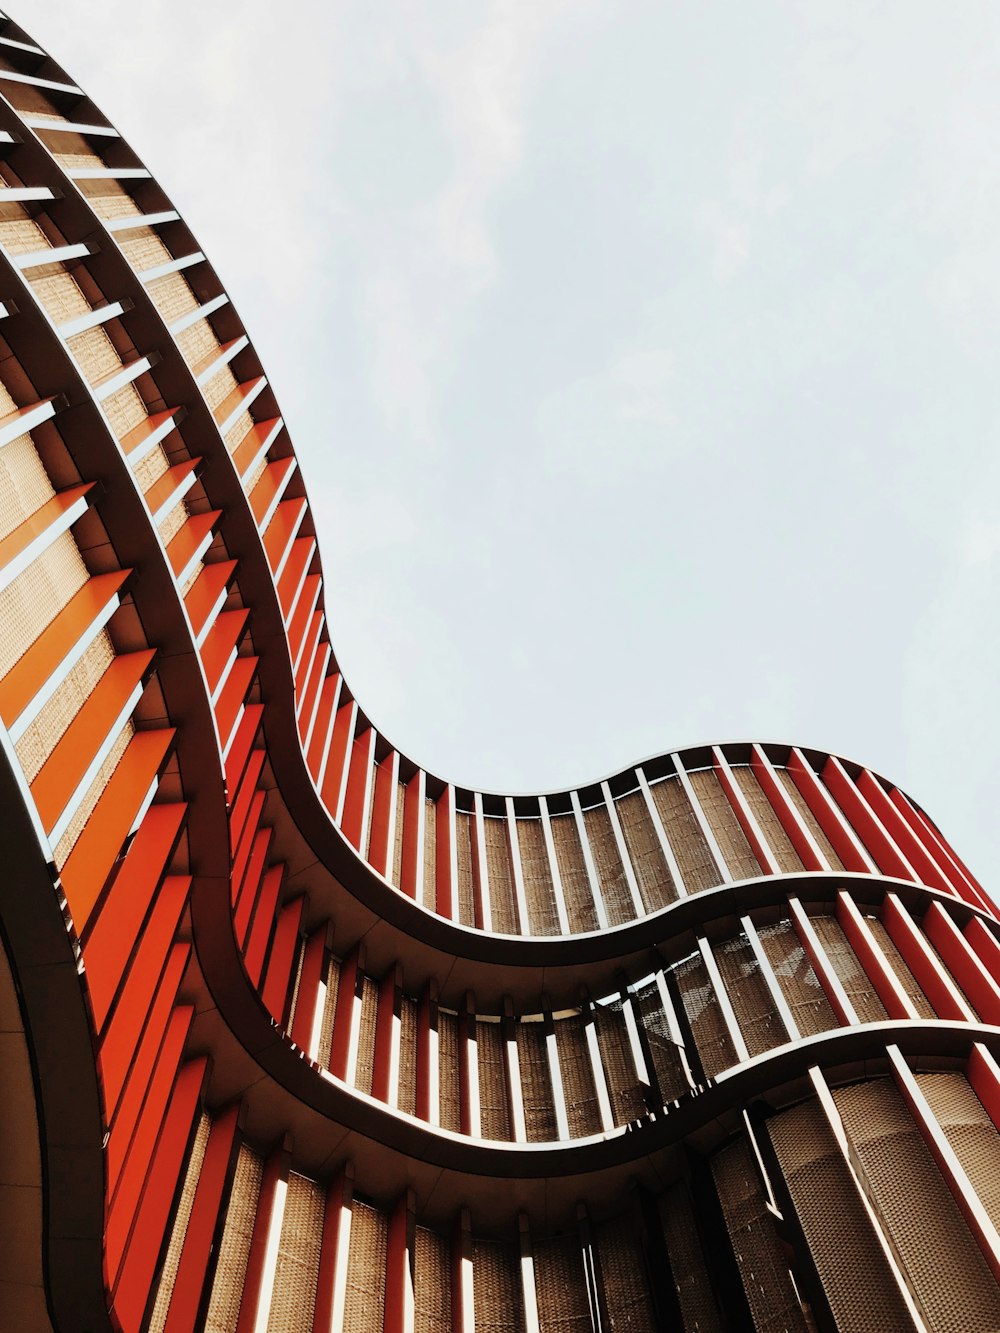 low angle view of orange and brown architectural building